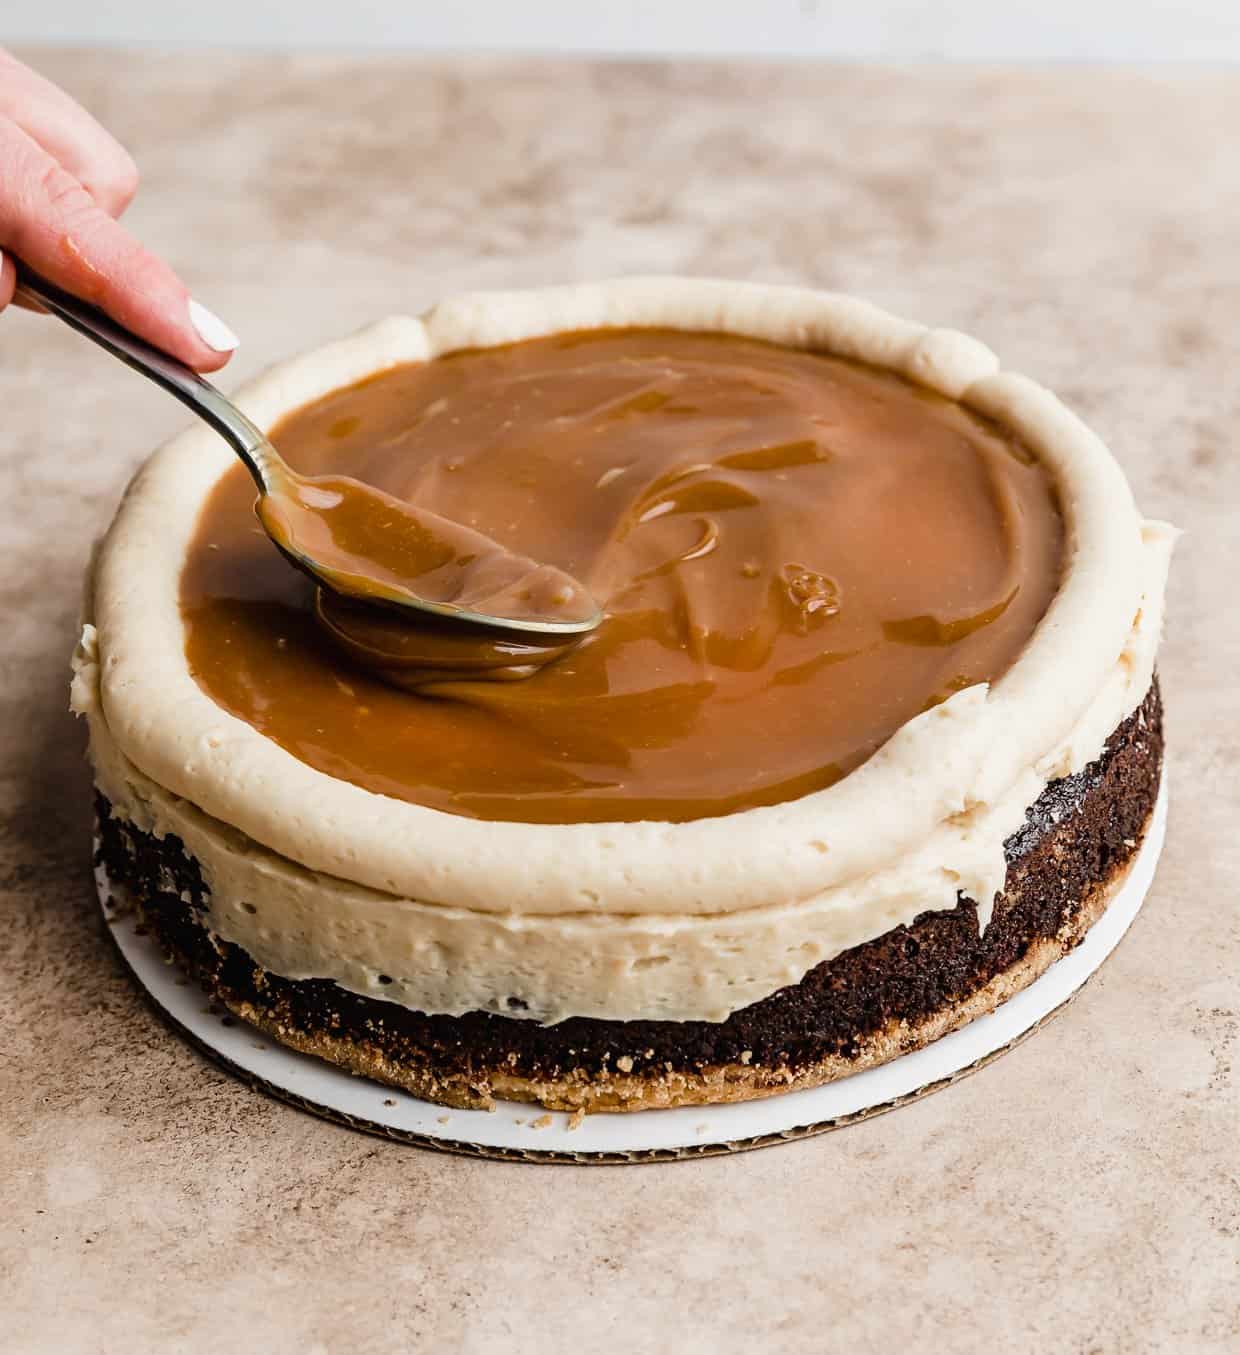 A spoon spreading caramel overtop a shortbread buttercream frosted chocolate cake layer.